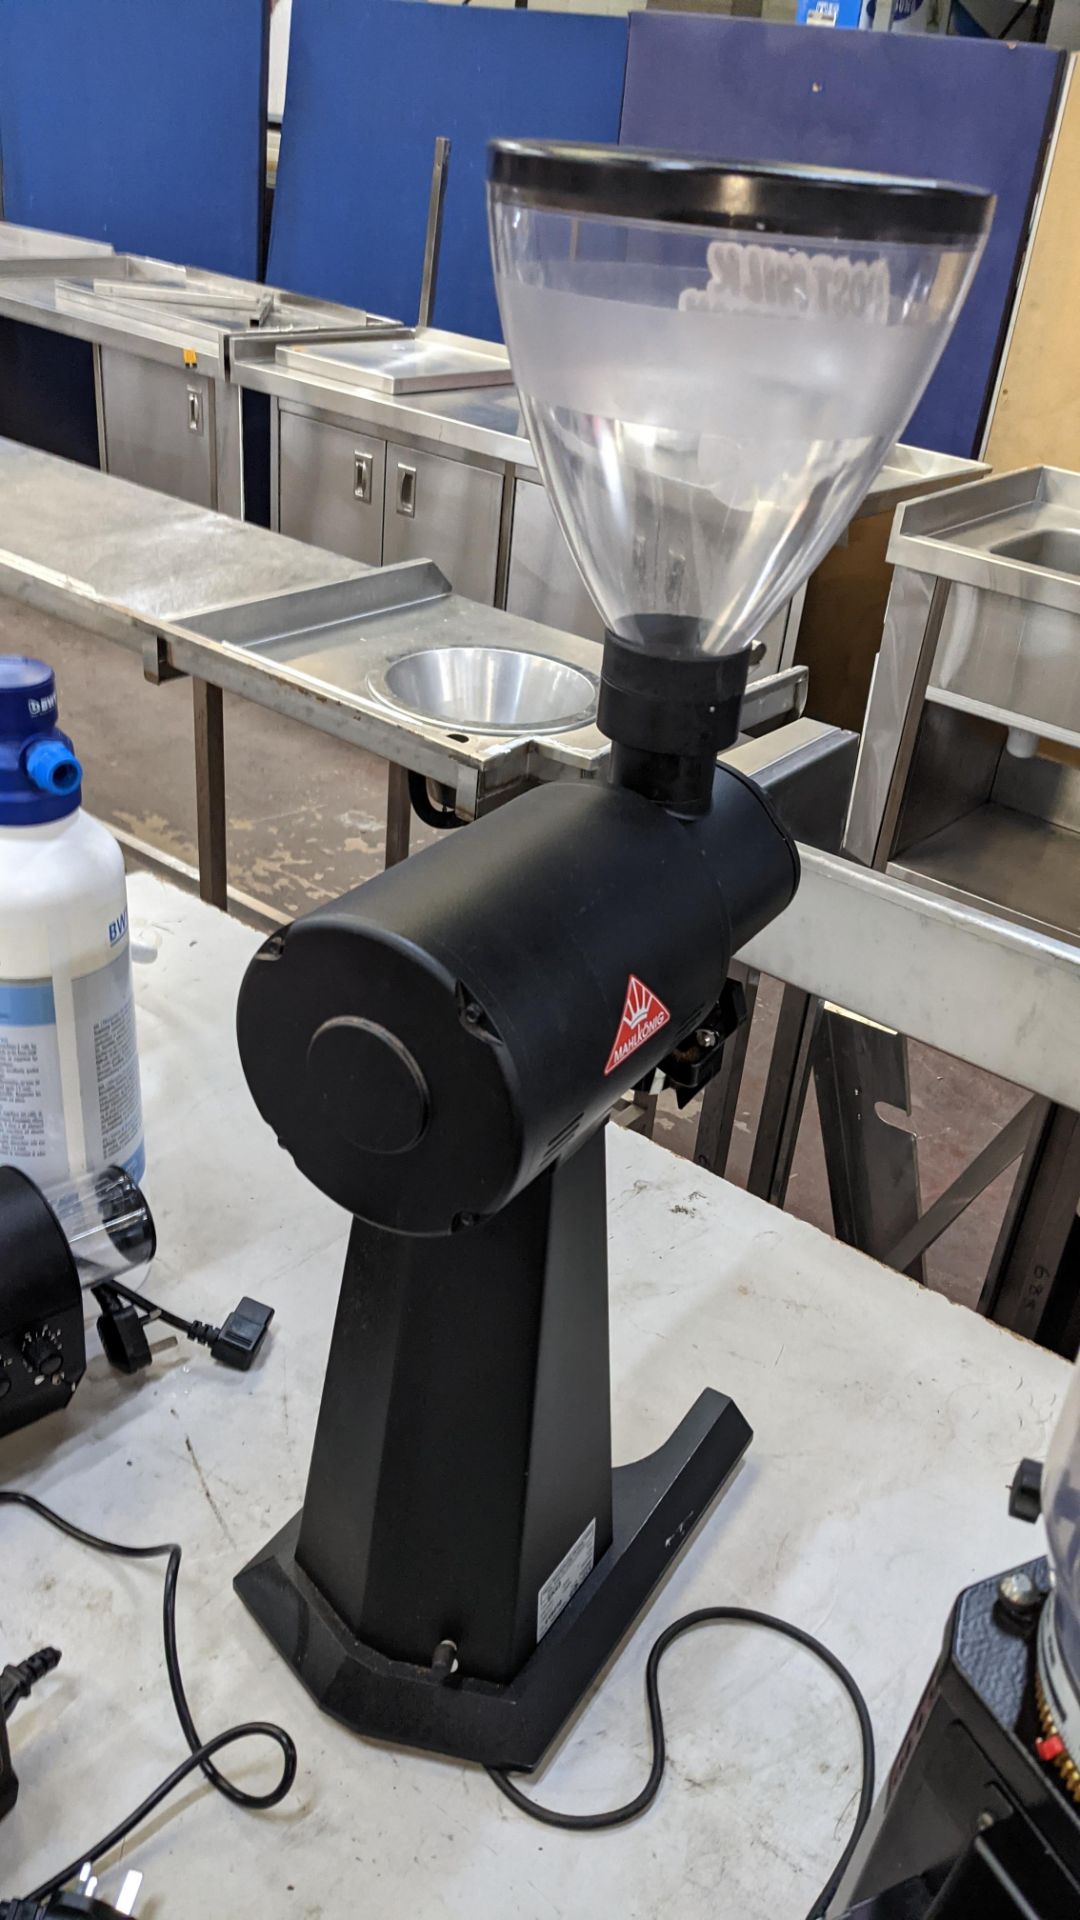 2019 Mahlkoenig model EK43 commercial coffee grinder, purchased in mid-2019 for approx. £2,000 plus - Image 10 of 15